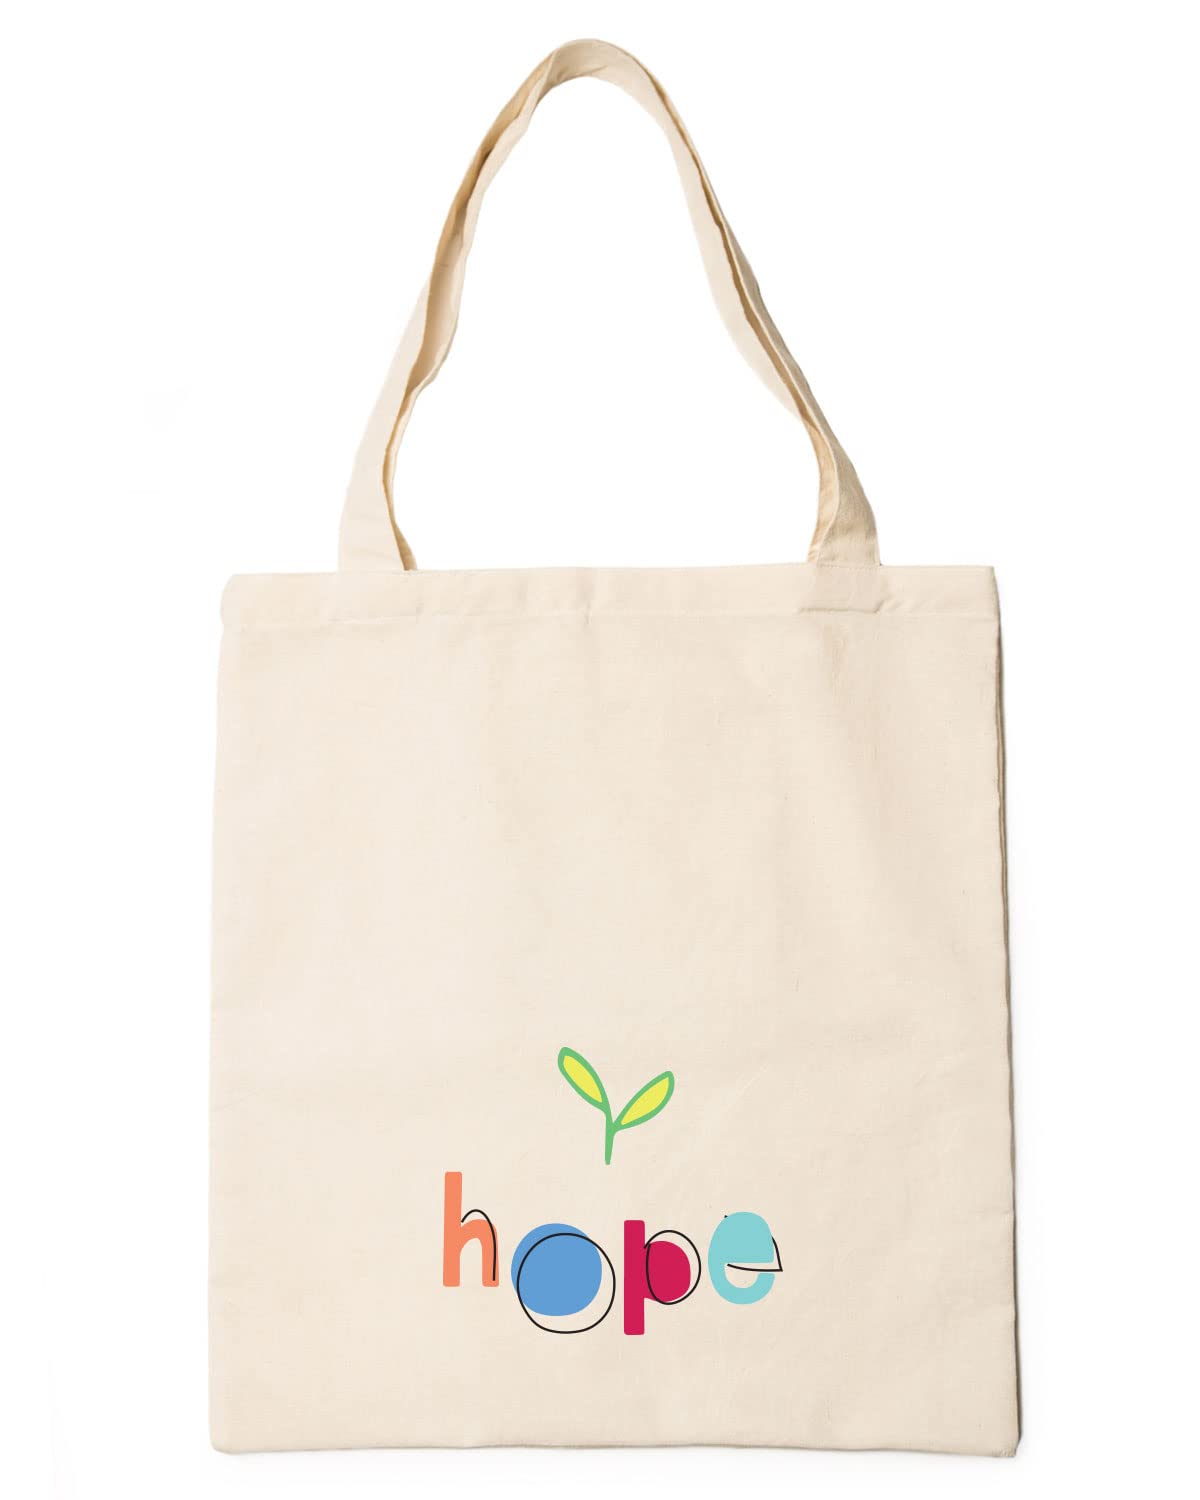 The Pink Magnet Hope Tote Bag - Canvas Tote Bag for Women | Printed Multipurpose Cotton Bags | Cute Hand Bag for Girls | Best for College, Travel, Grocery | Reusable Shopping Bag | Eco-Friendly Tote Bag